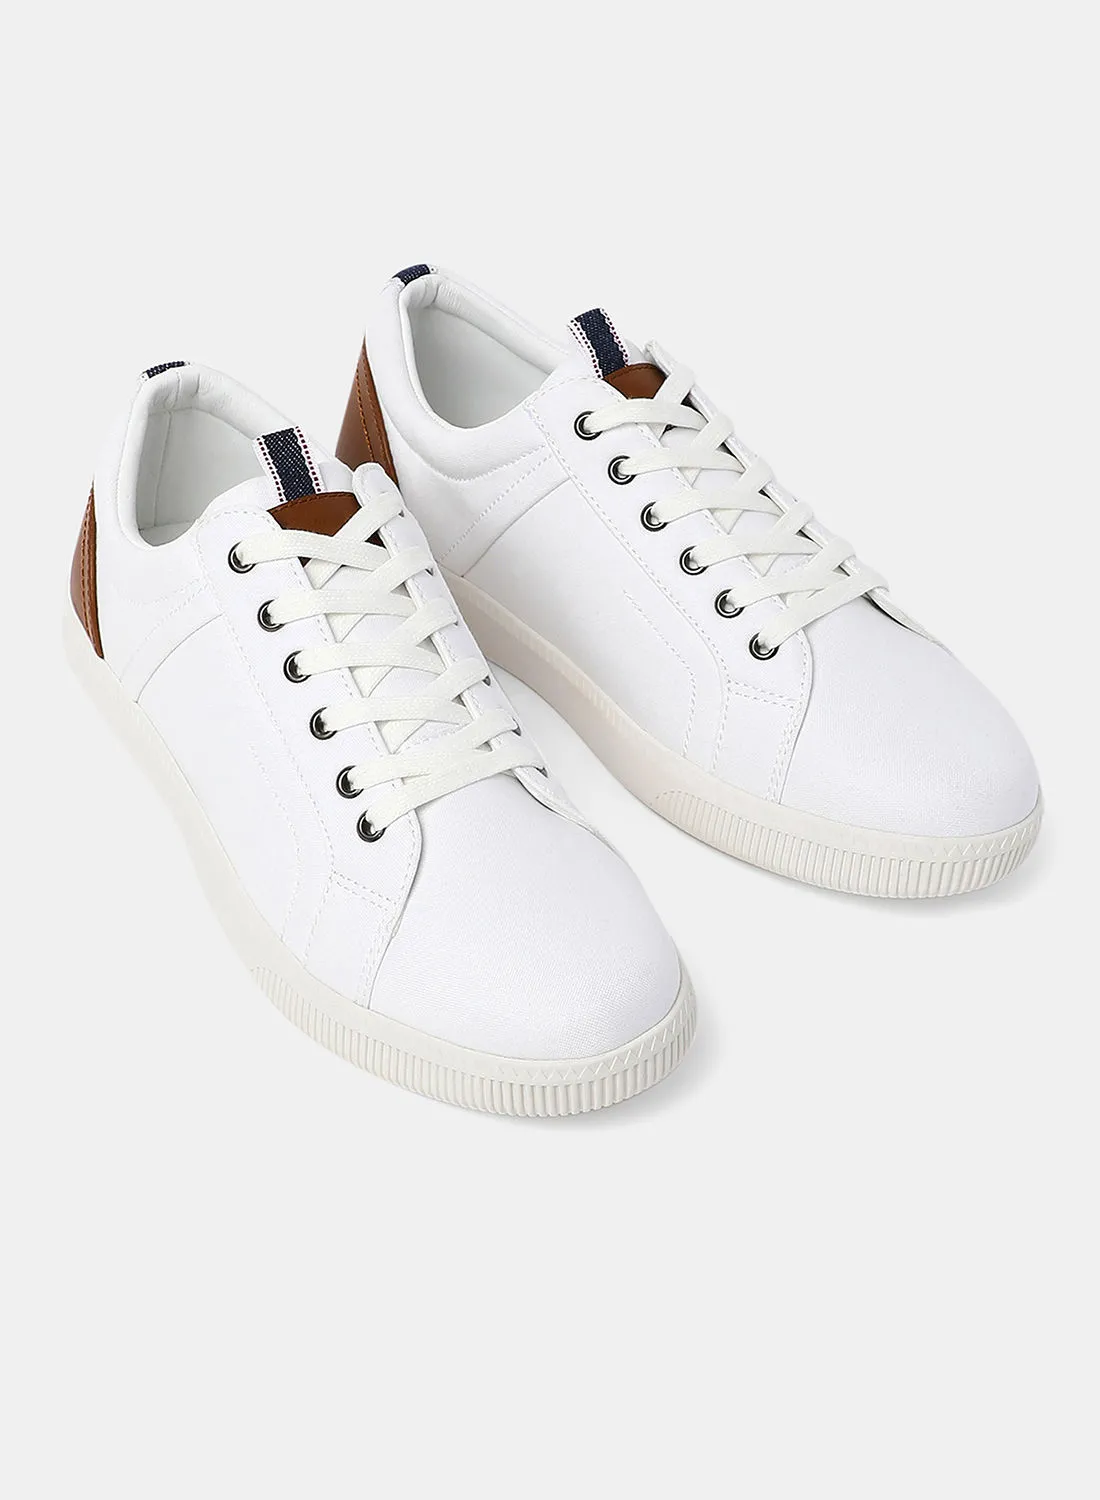 Athletiq Low Top Sneakers White/Brown